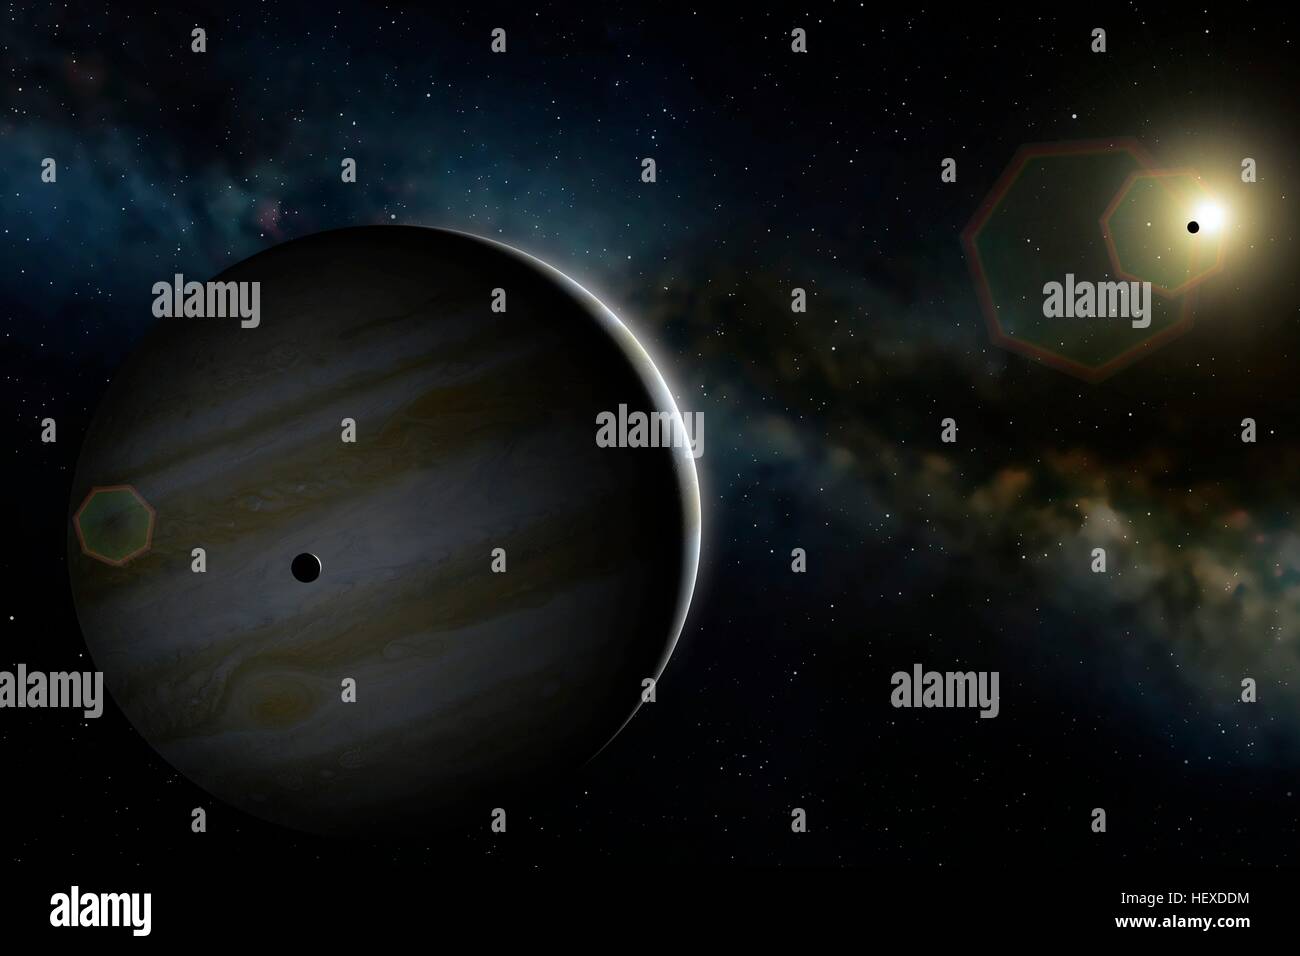 An impression of the largest planet in the Solar System, Jupiter, showing the world from a vantage point somewhat beyond the orbit of the second Galilean moon, Europa (seen superimposed on Jupiter). The innermost Galilean moon, Io, is seen in front of the Sun. The rings are not visible in this image, as they are too faint. Stock Photo